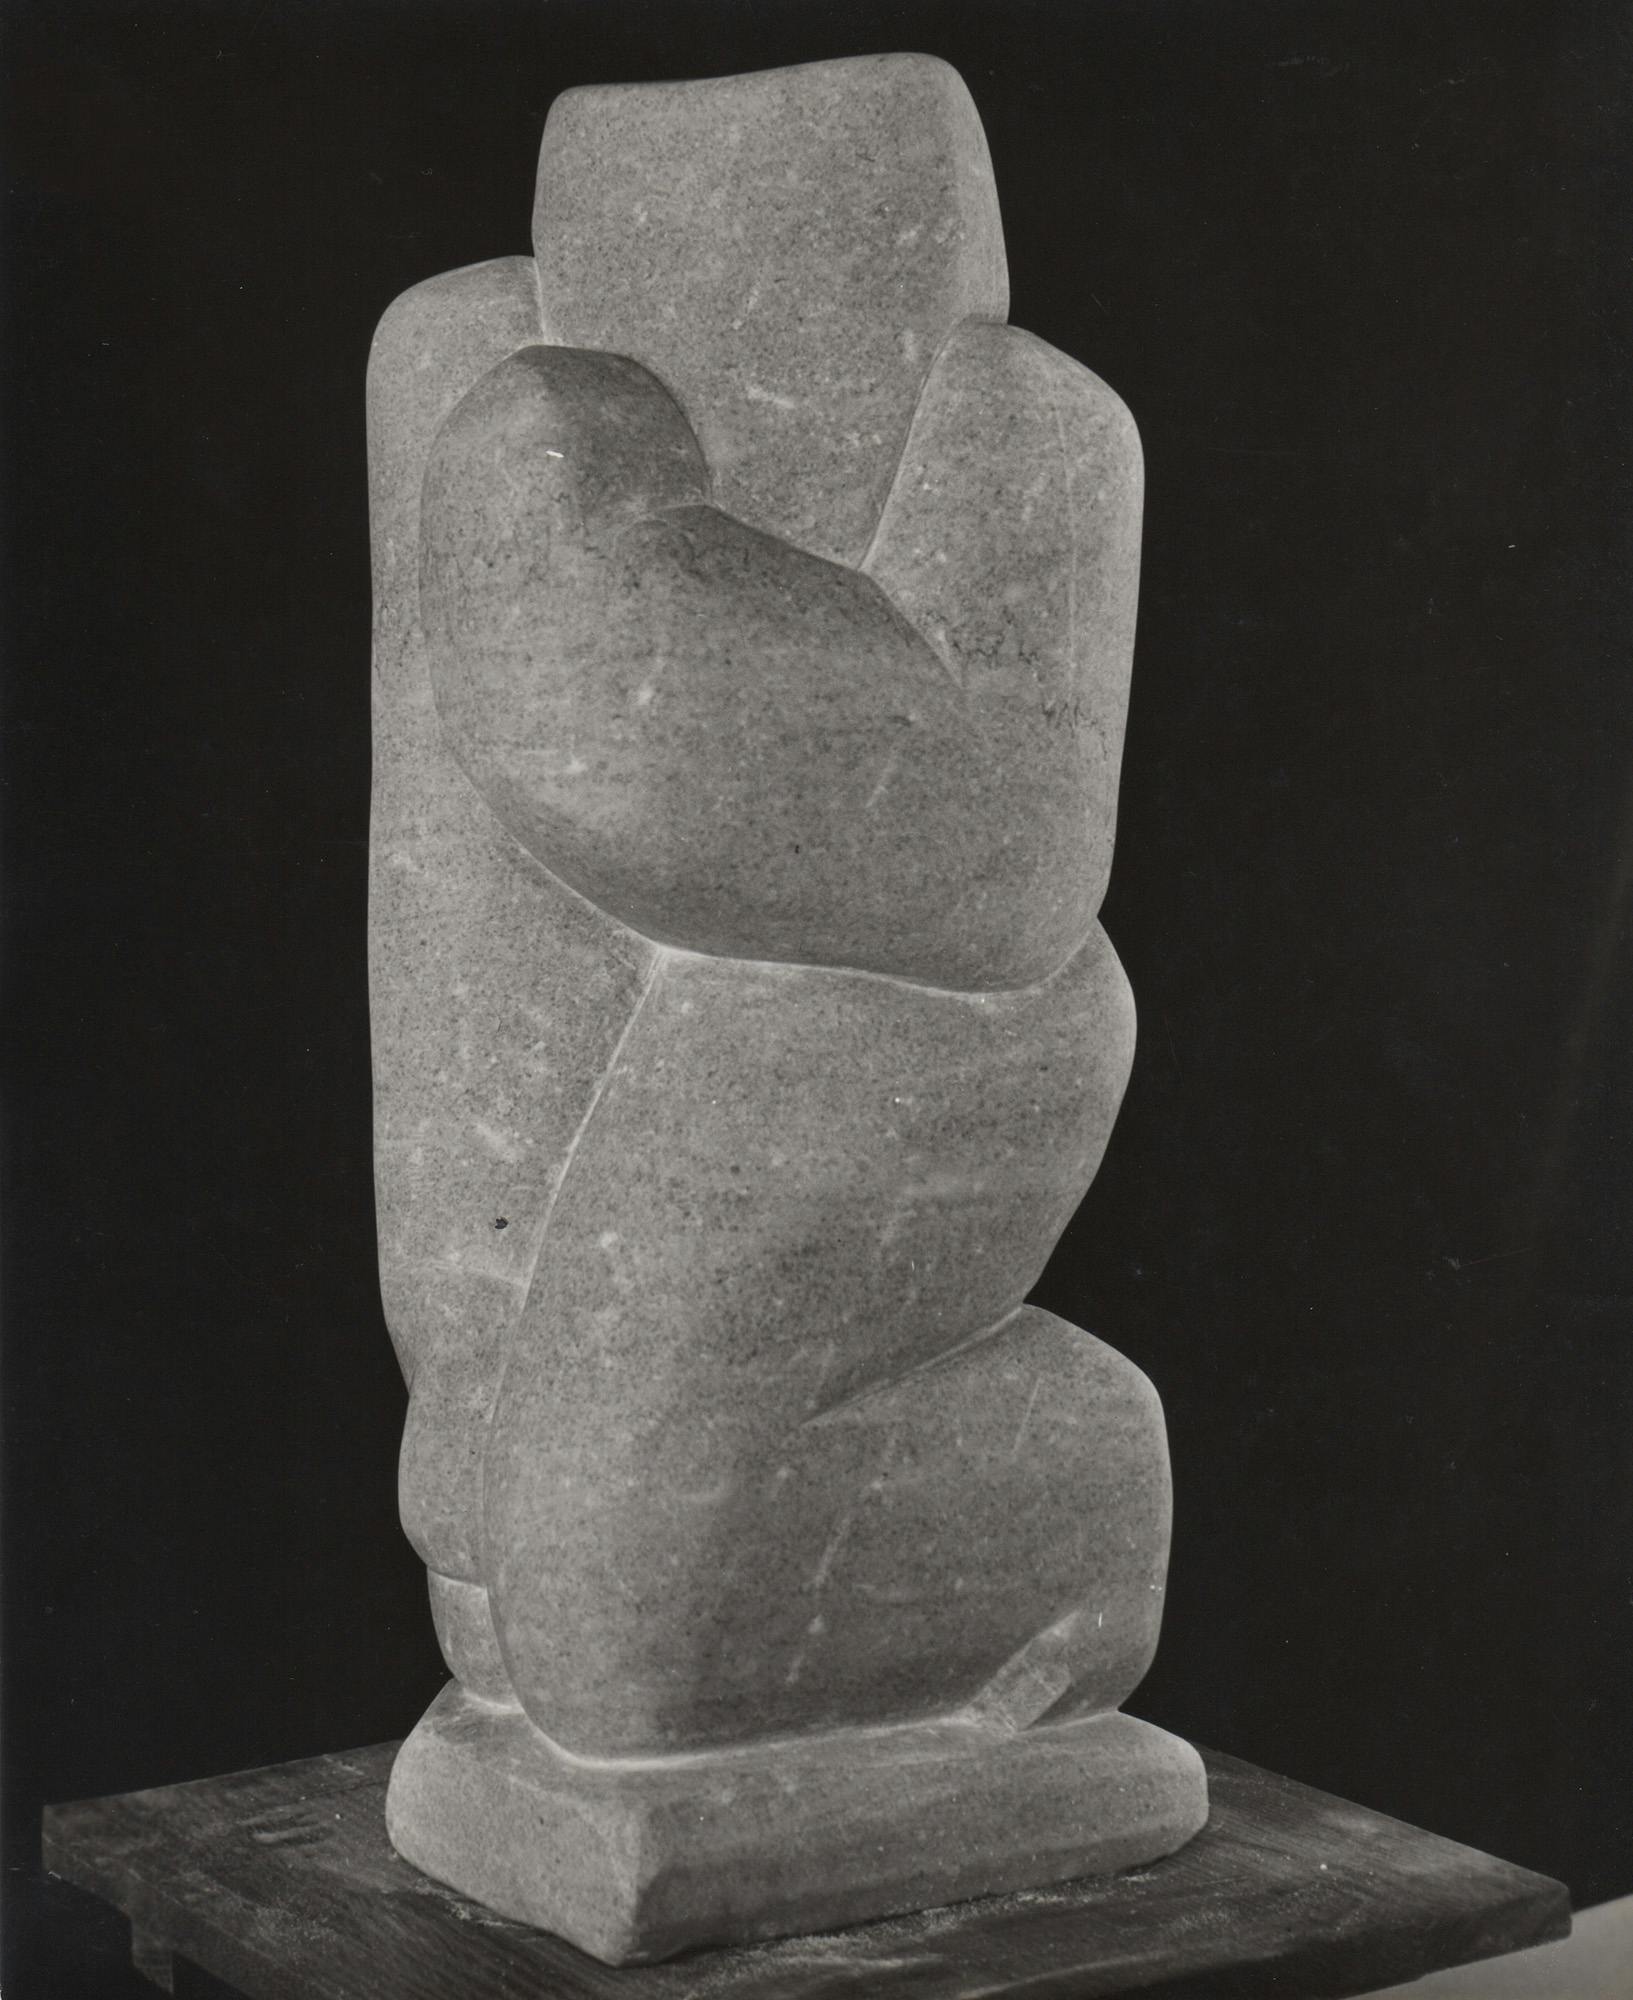 Tennessee Marble, c. 1937. – The Richard Pousette-Dart Foundation